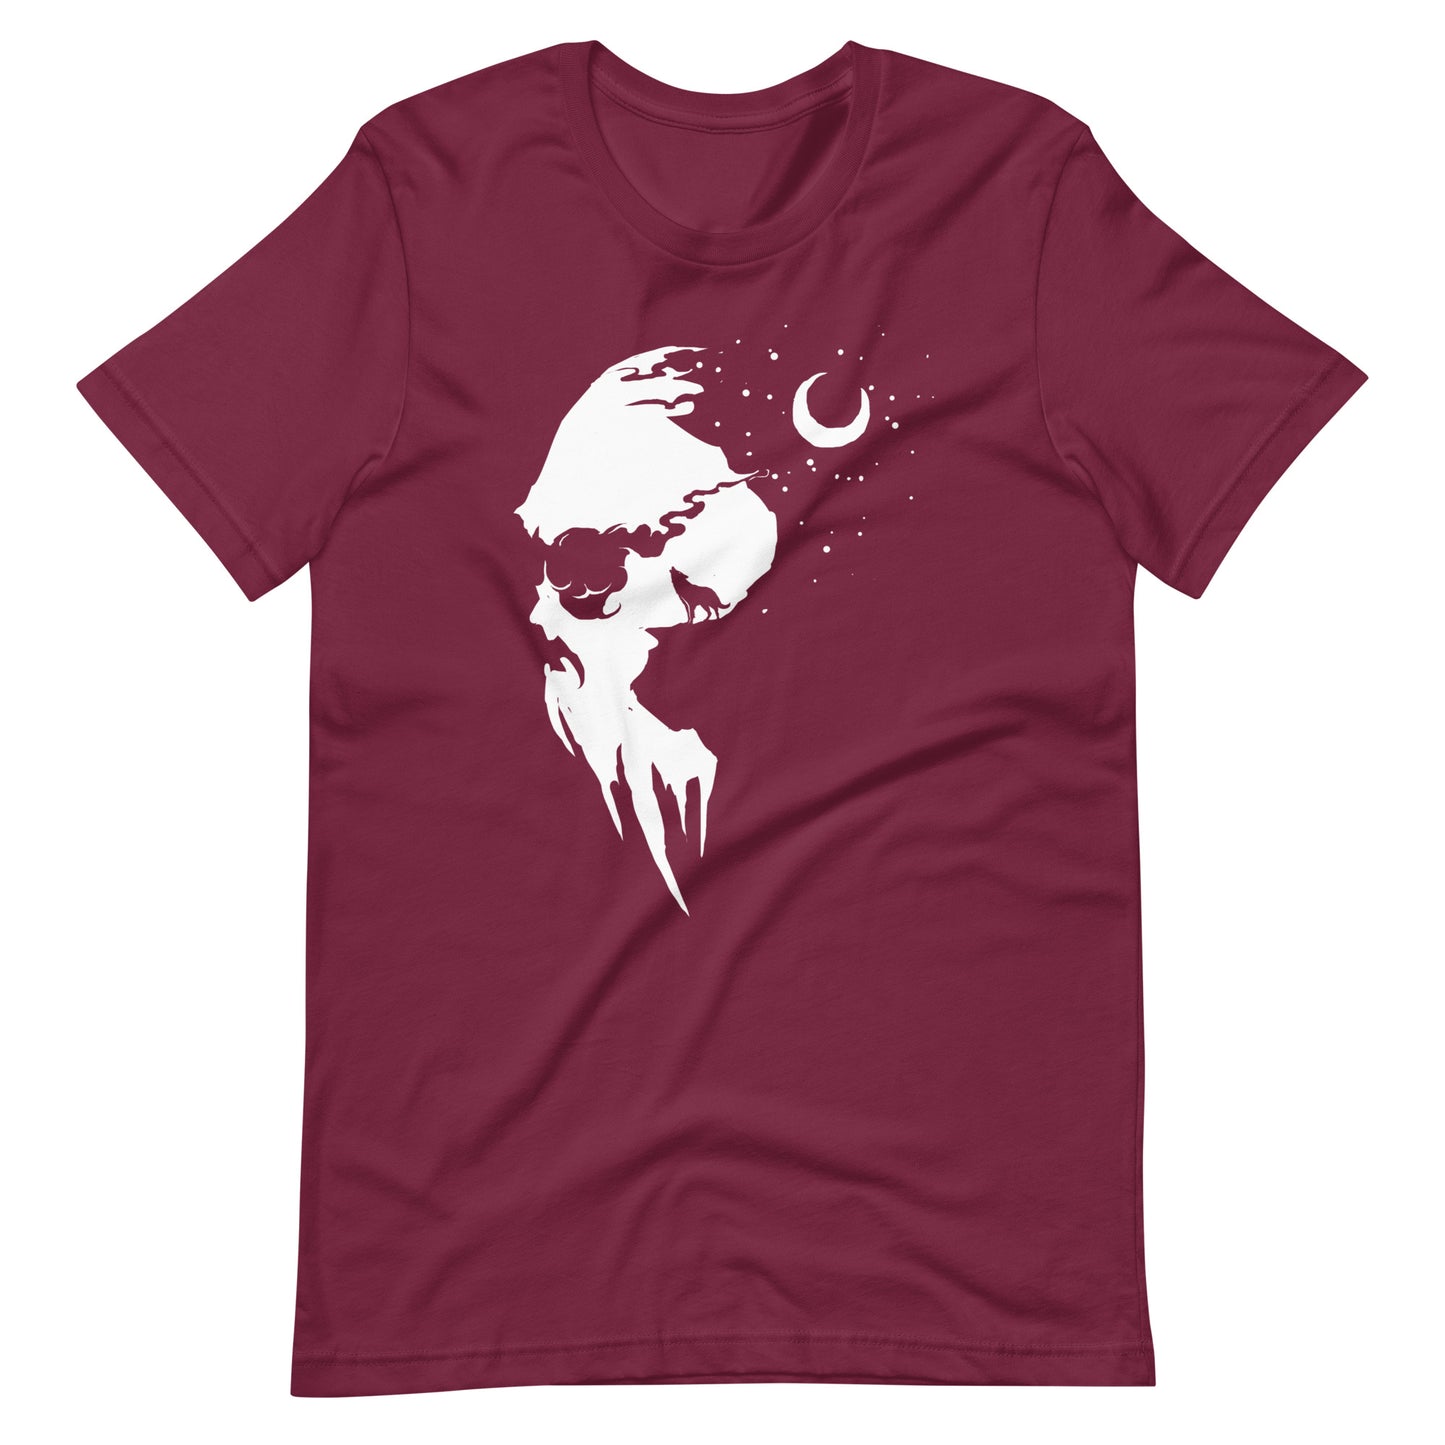 The Night Has Come - Men's t-shirt - Maroon Front